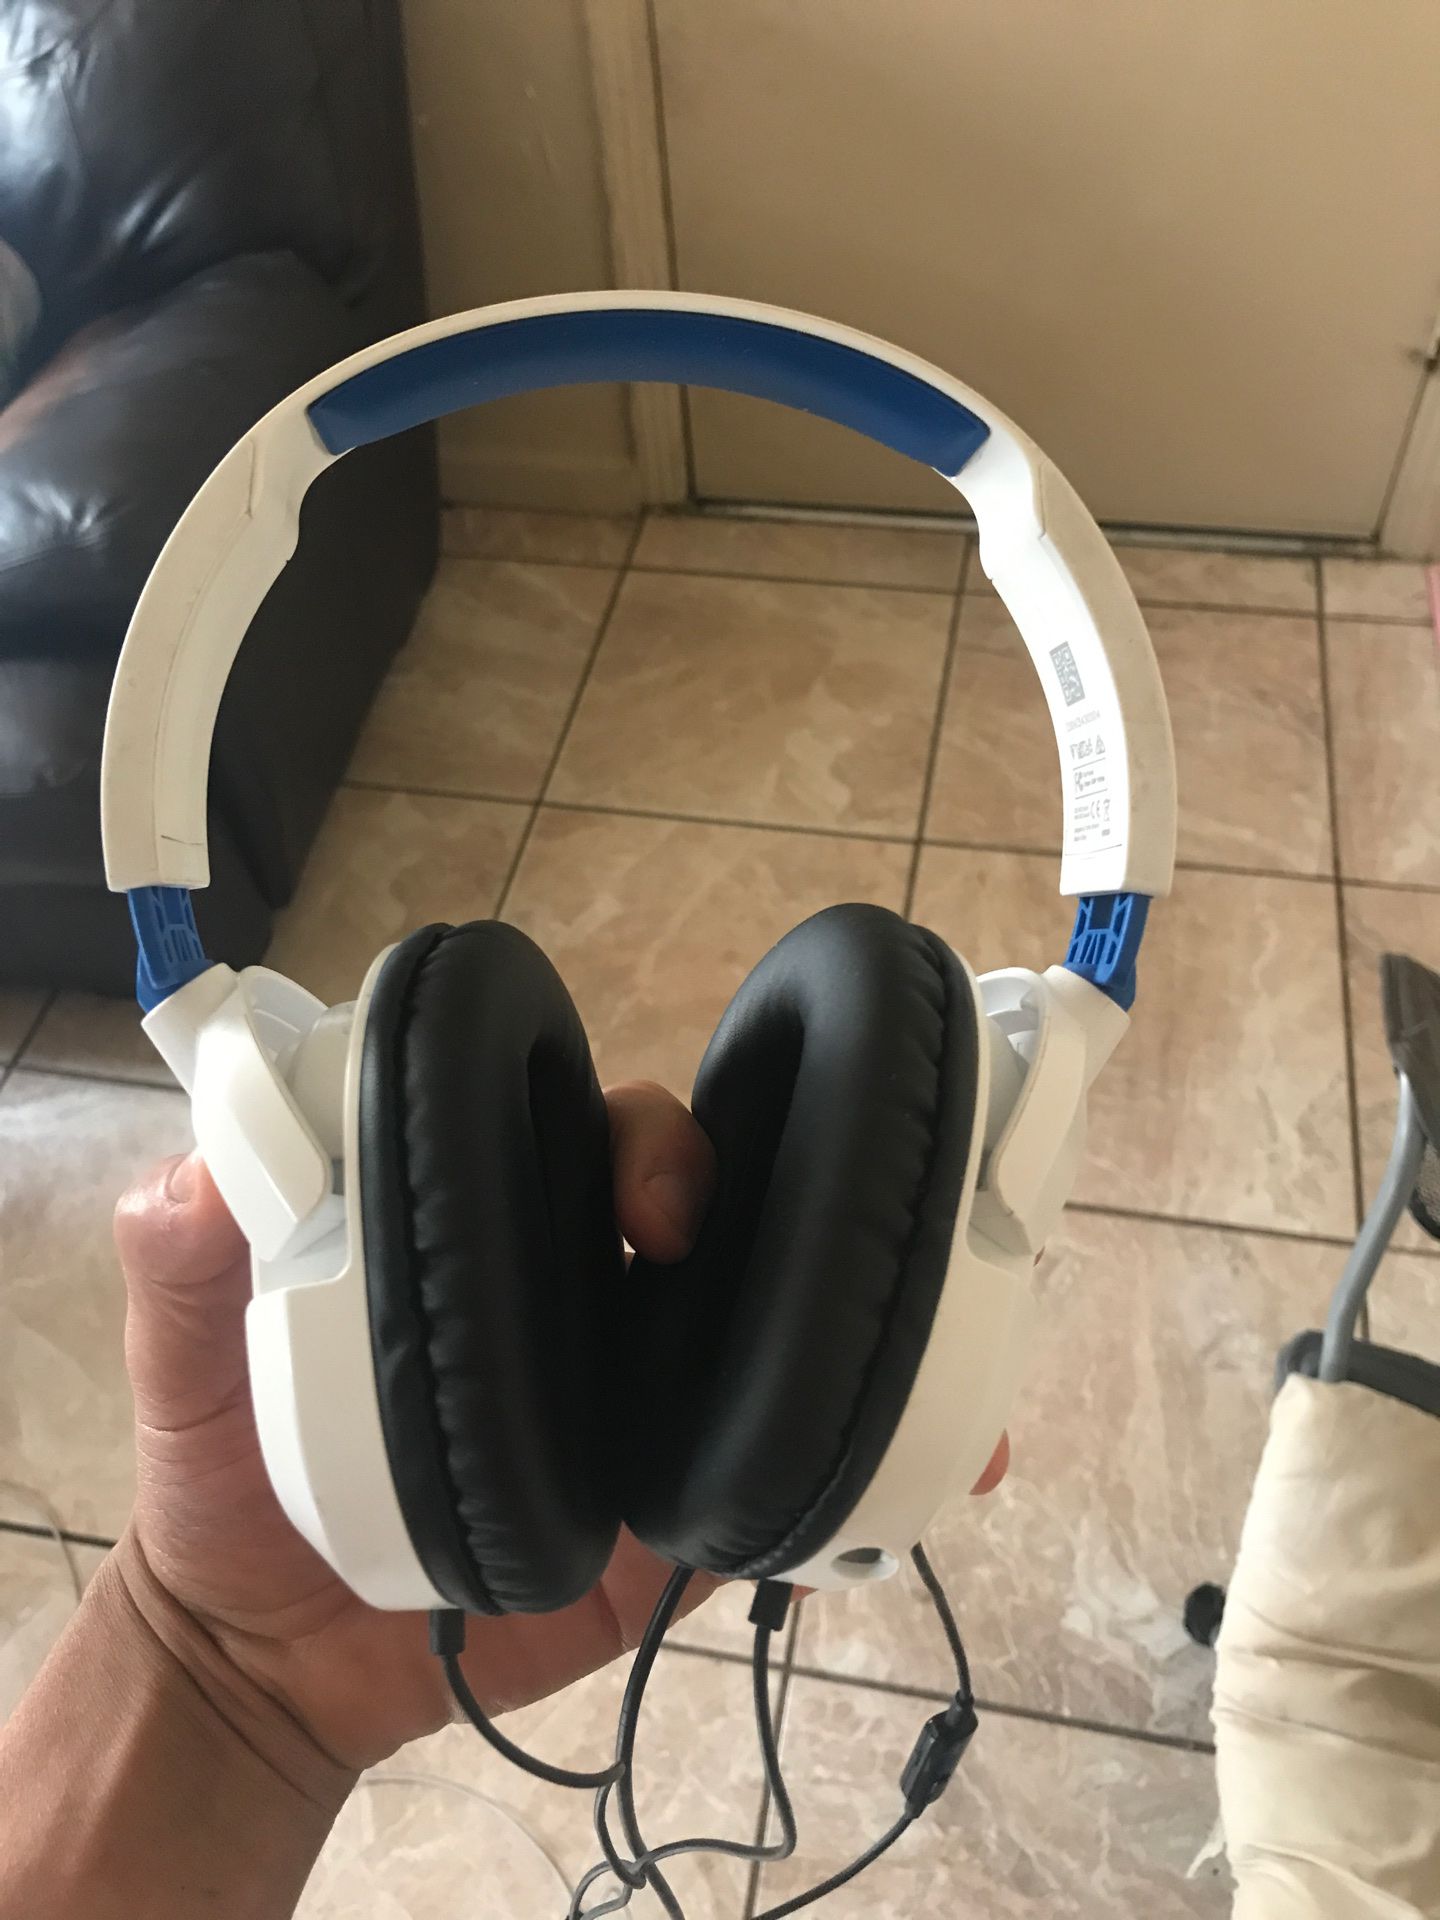 Turtle Beach headset with no mic